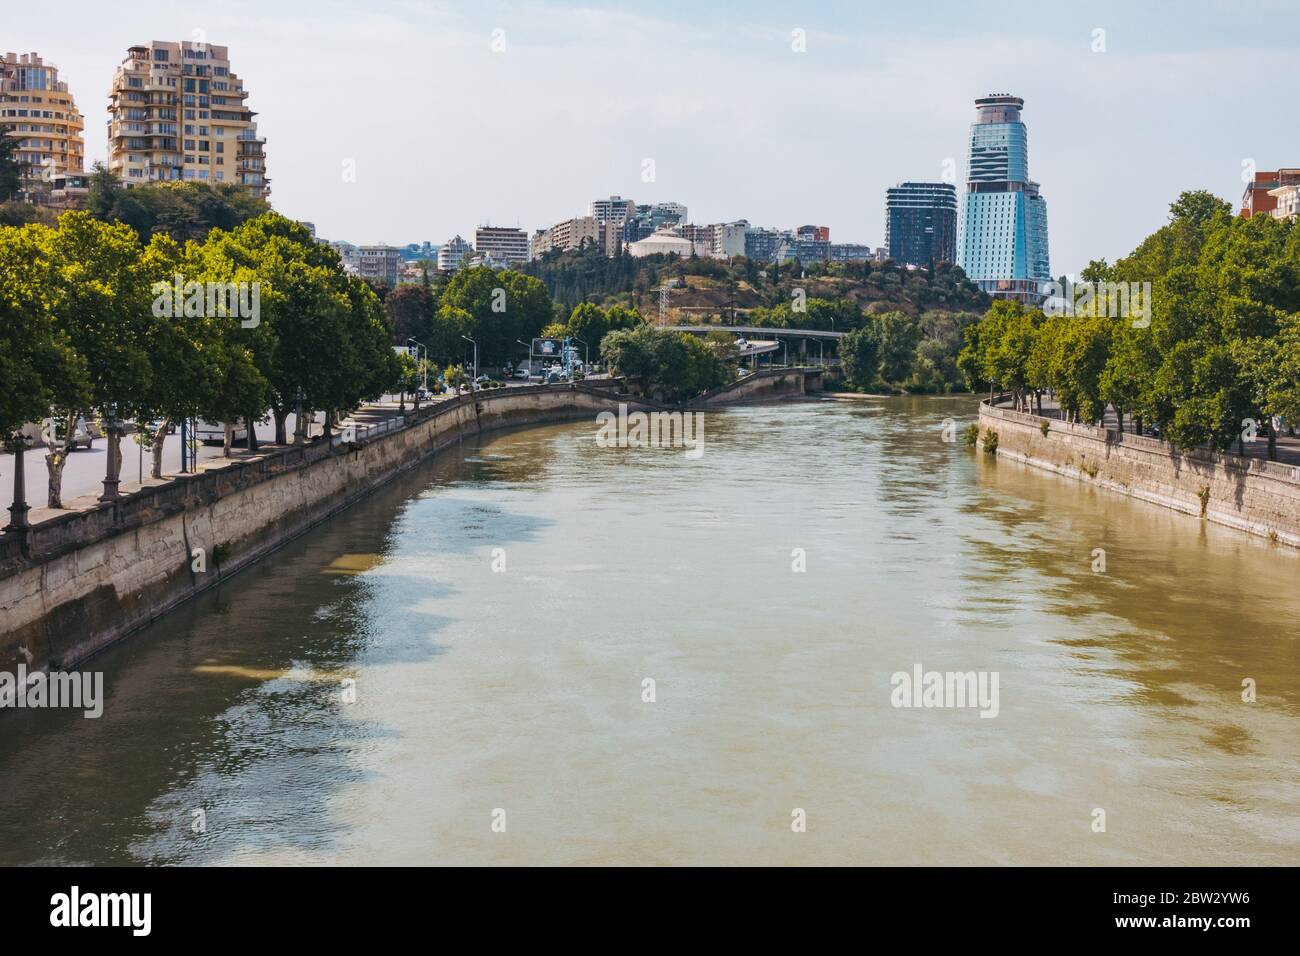 Looking down the Mtkvari River in Tbilisi, the capital city of Georgia Stock Photo